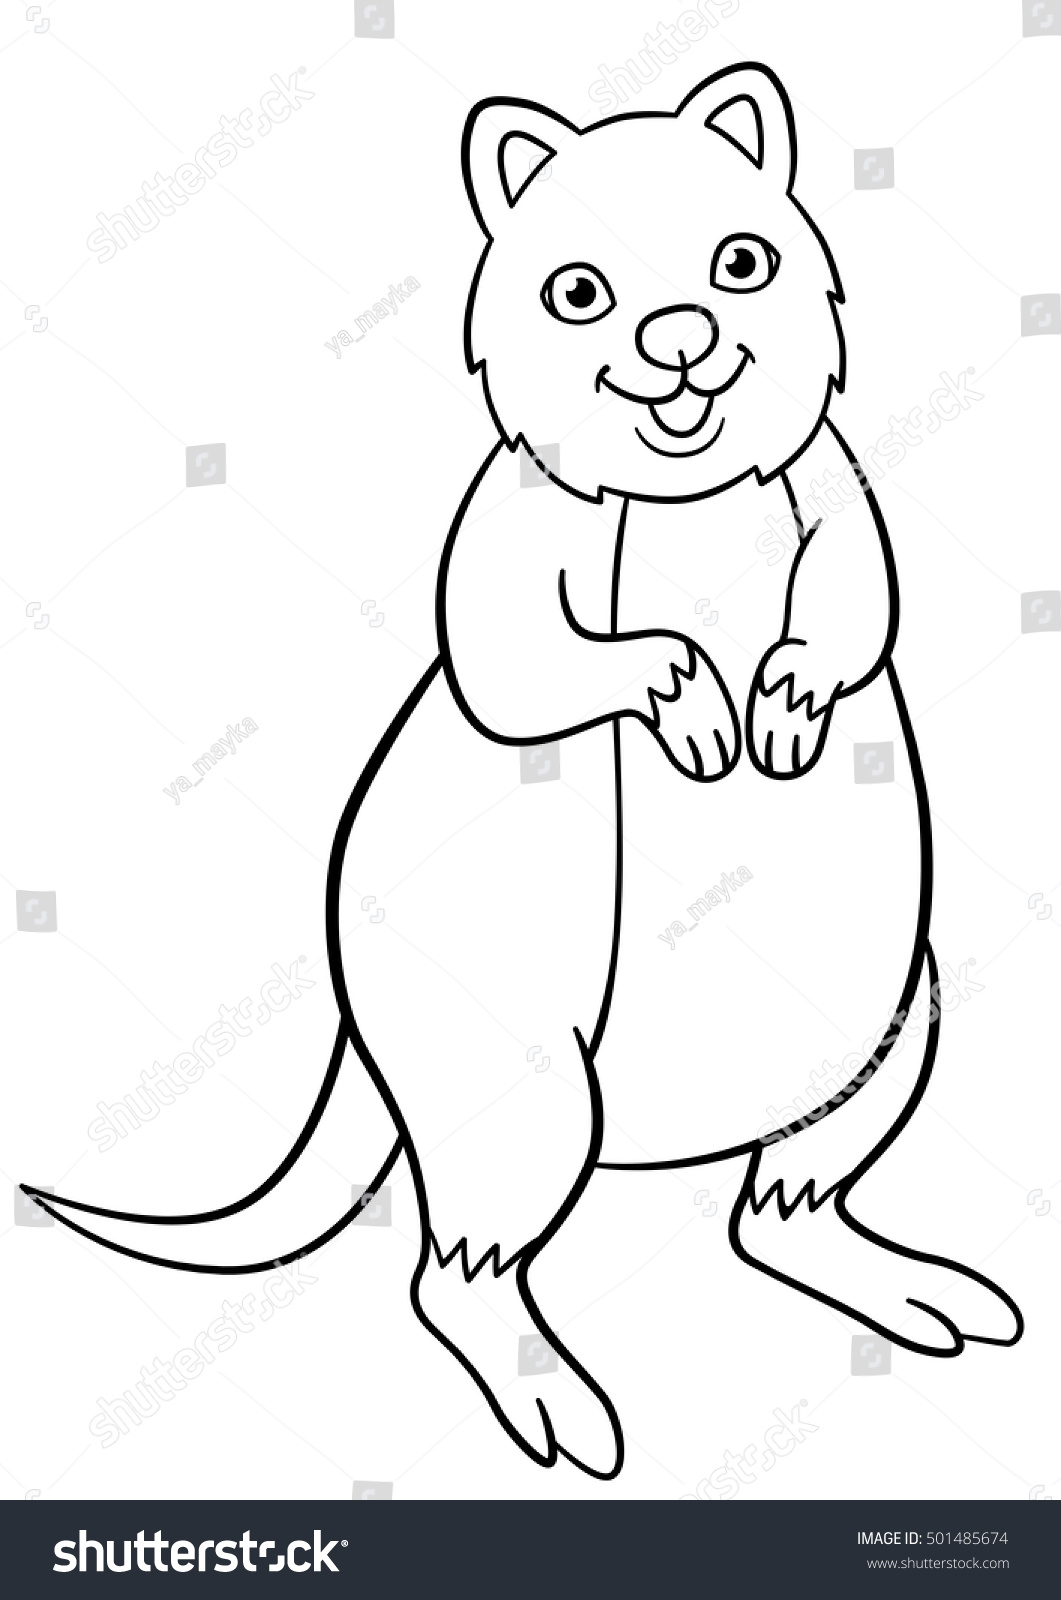 Coloring pages little cute quokka stands stock vector royalty free